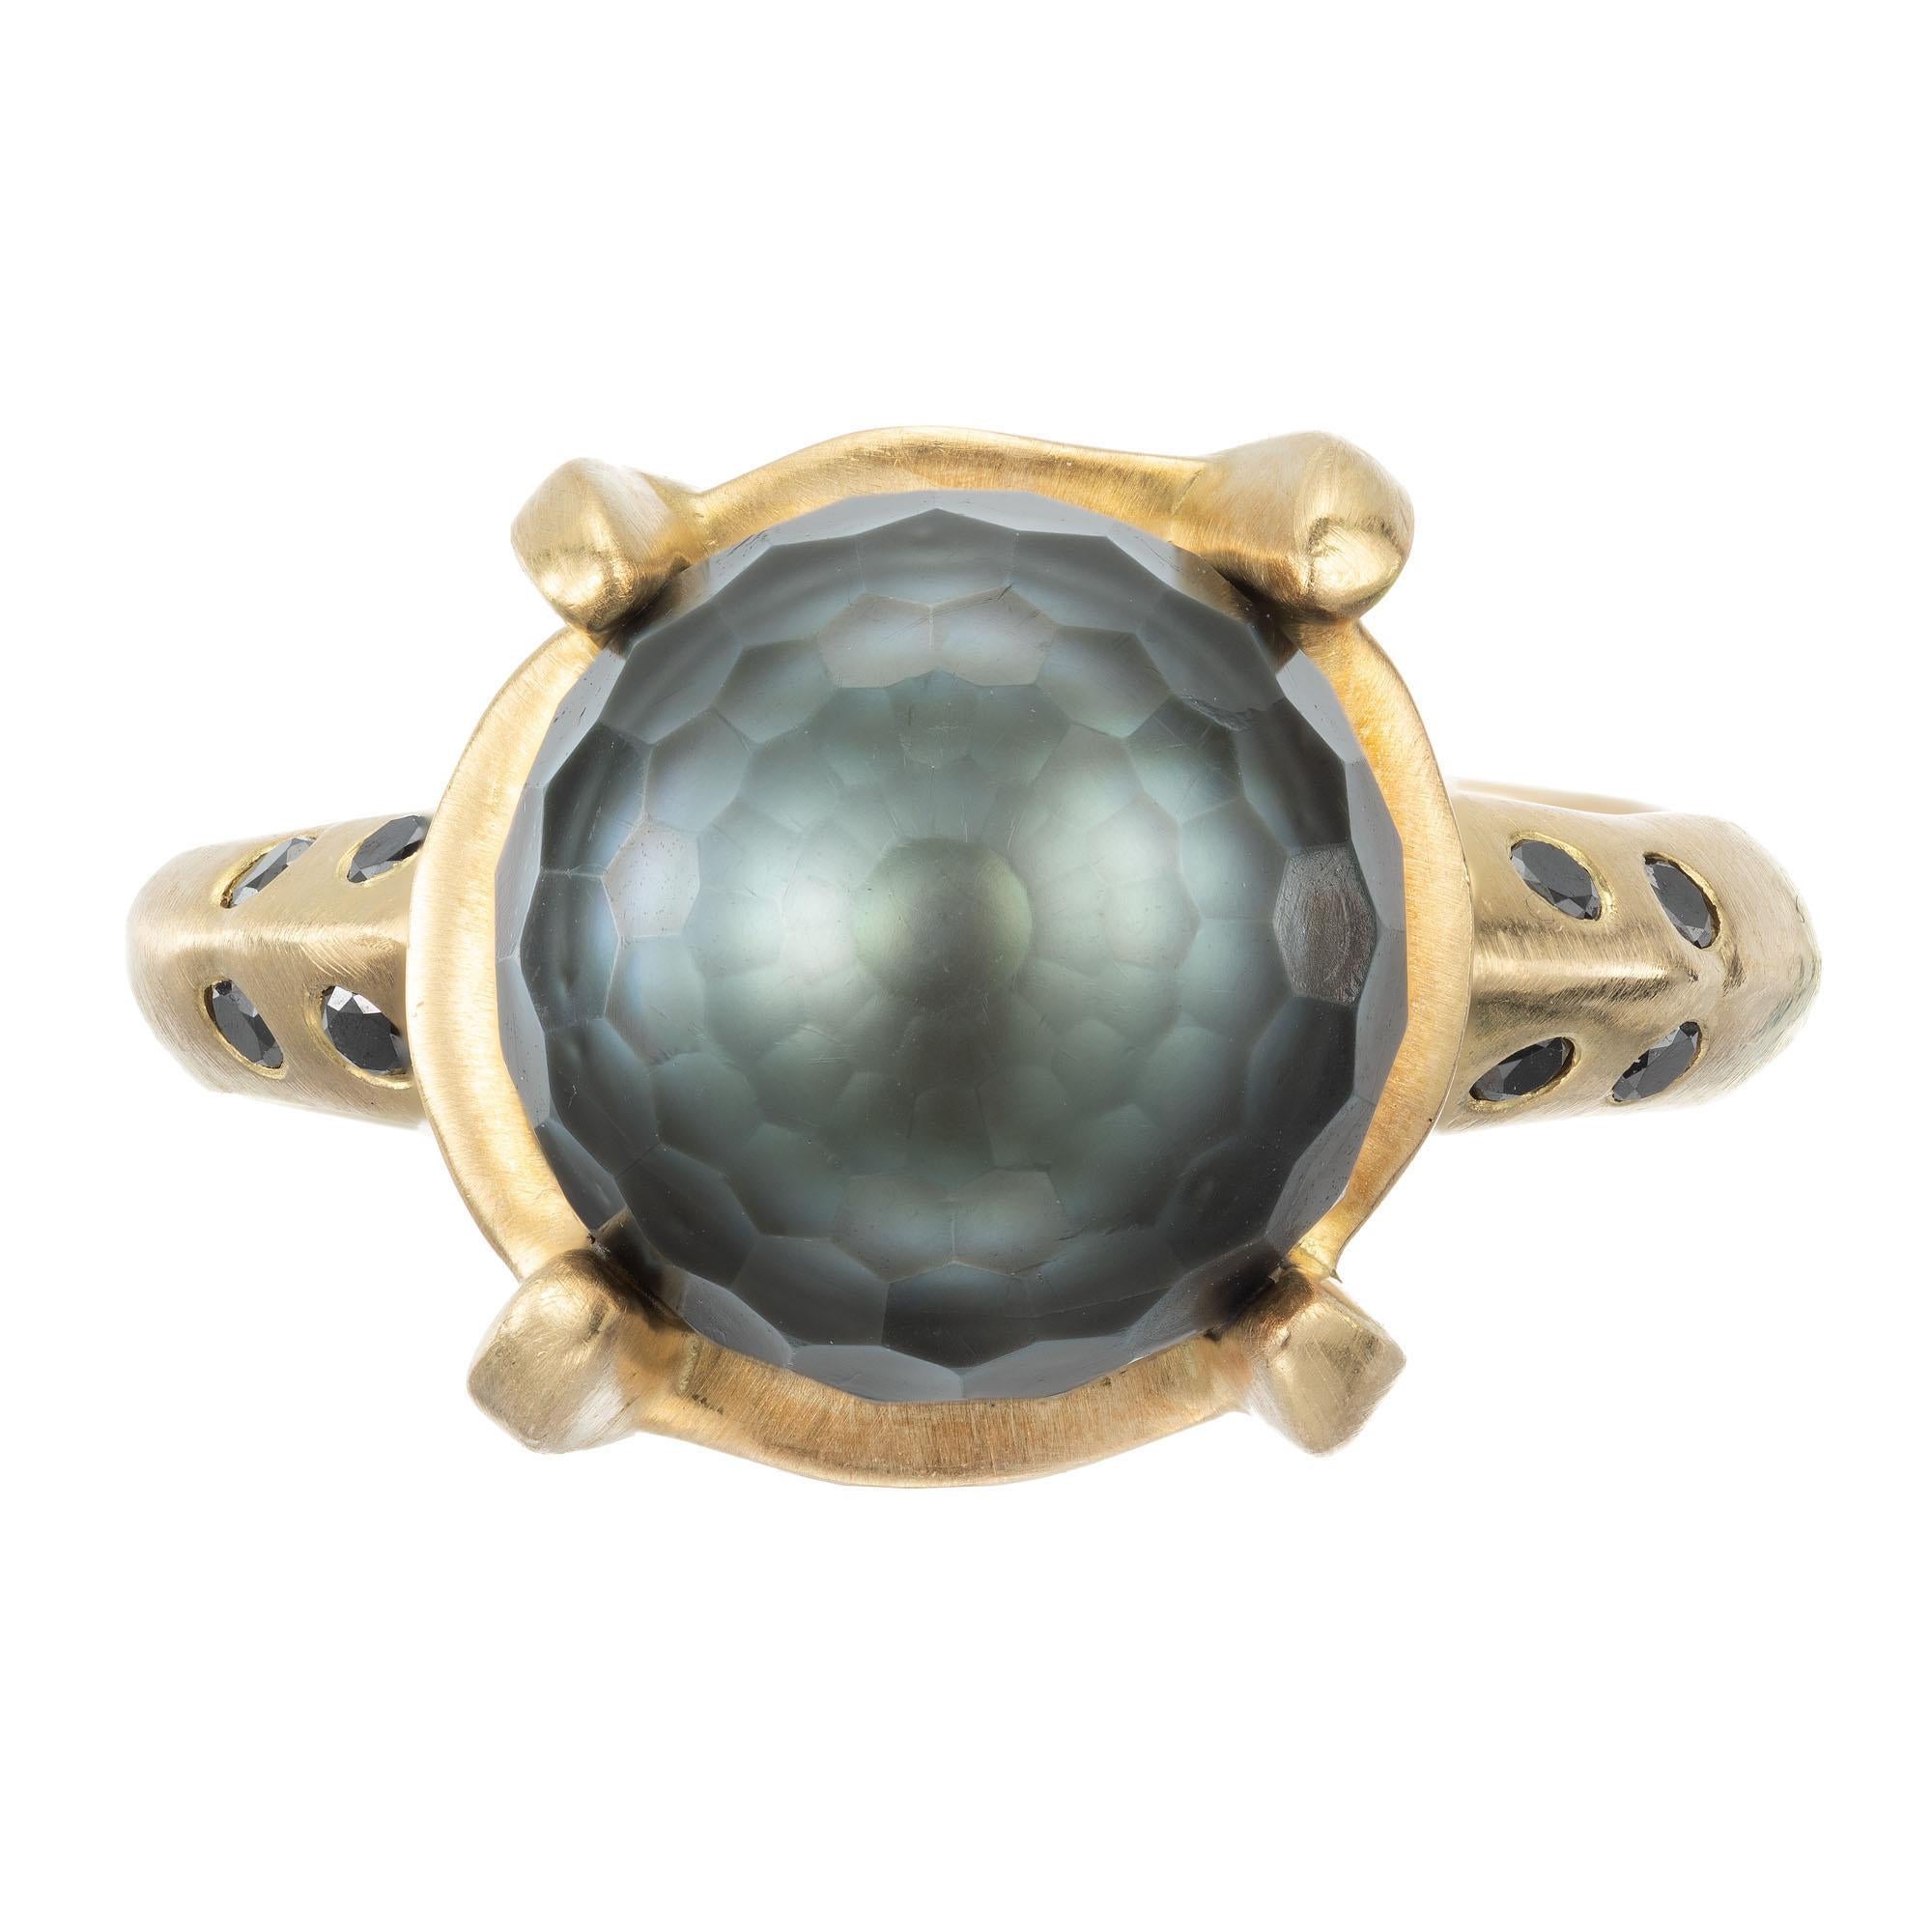 Robin Rotenier solid 18k yellow gold ring with brush finish, set with black diamonds and a center faceted black Tahitian cultured pearl.

1 black Tahitian faceted pearl 
12 round black diamonds, approx. .20cts
Size 8.5 and sizable 
18k yellow gold